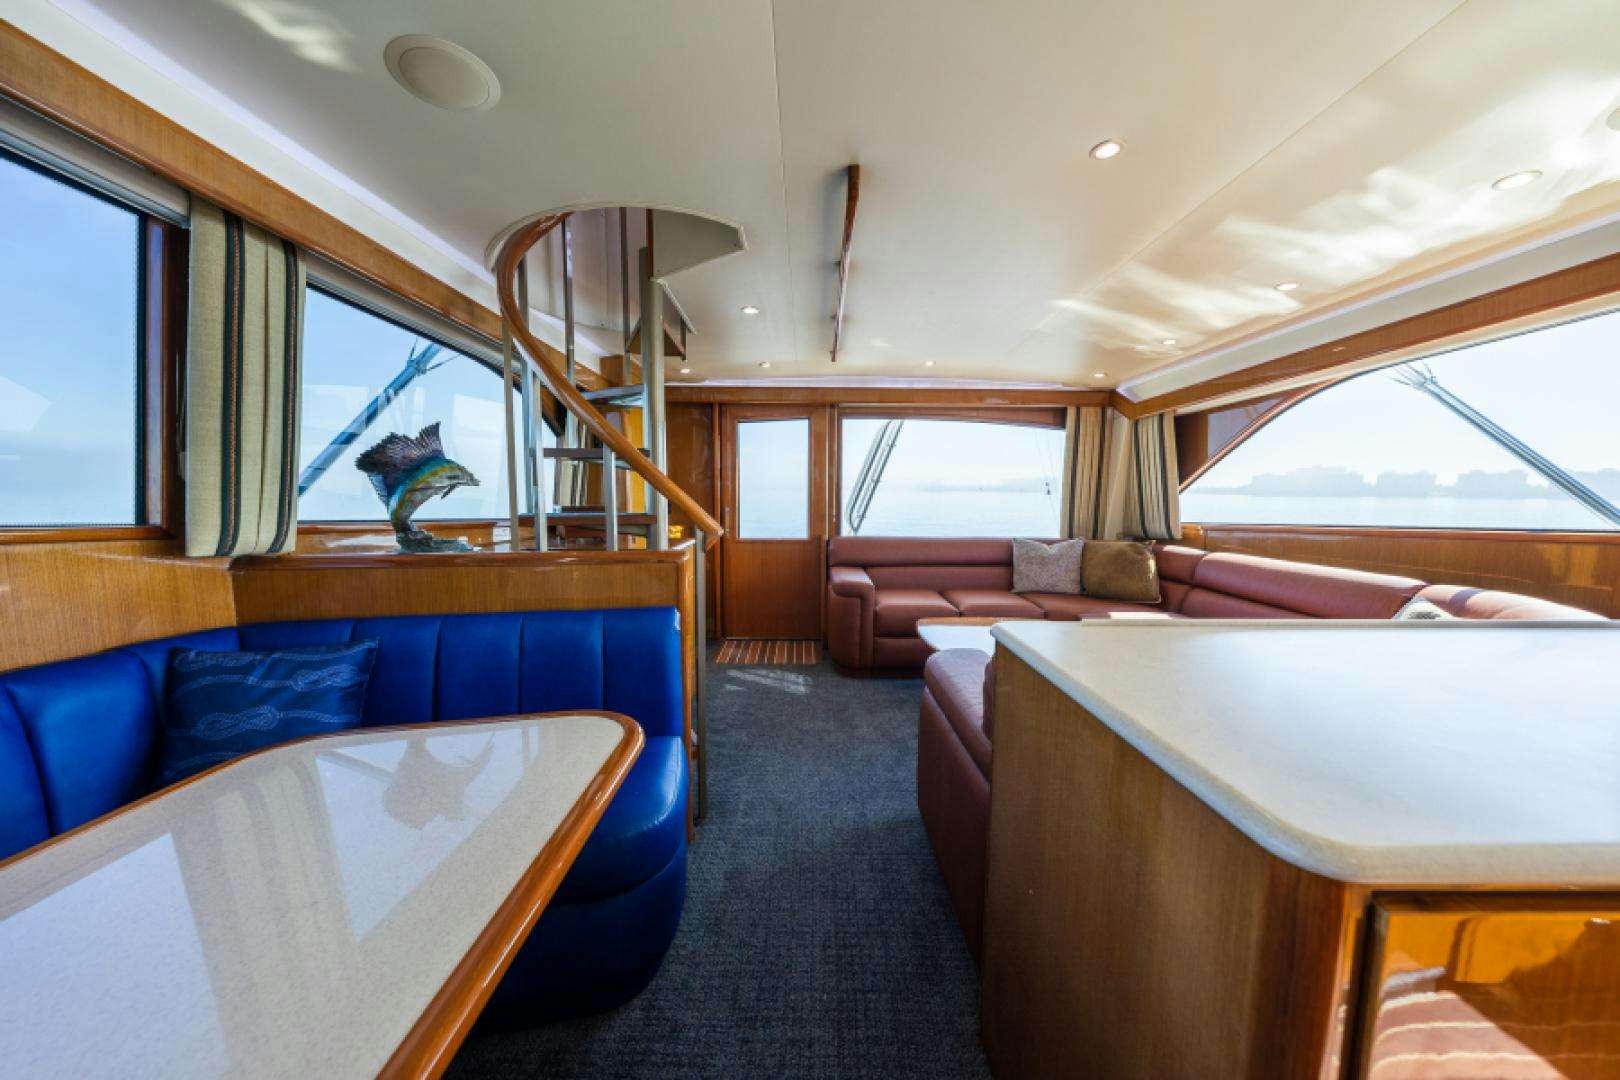 Reel haus
Yacht for Sale